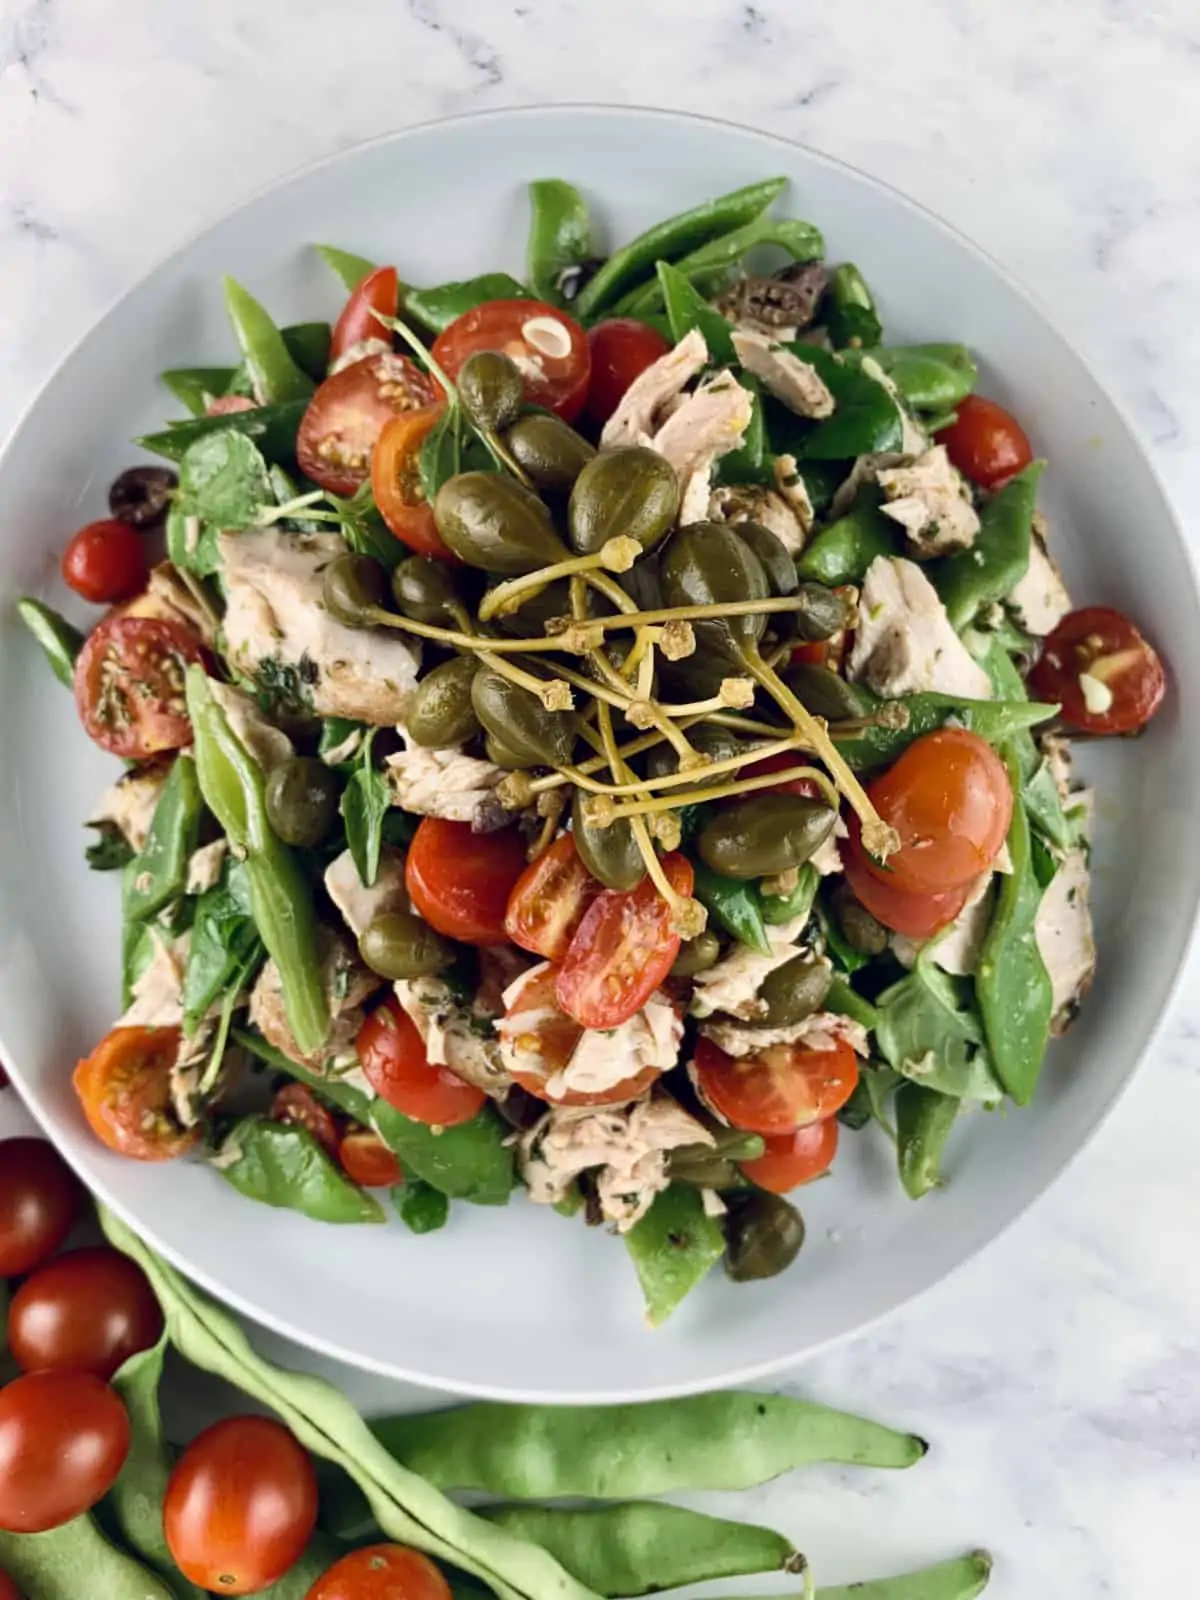 CLOSE UP OF GRILLED TUNA SALAD WITH FLAT BEANS, CAPERBERRIES AND CHERRY TOMATOES